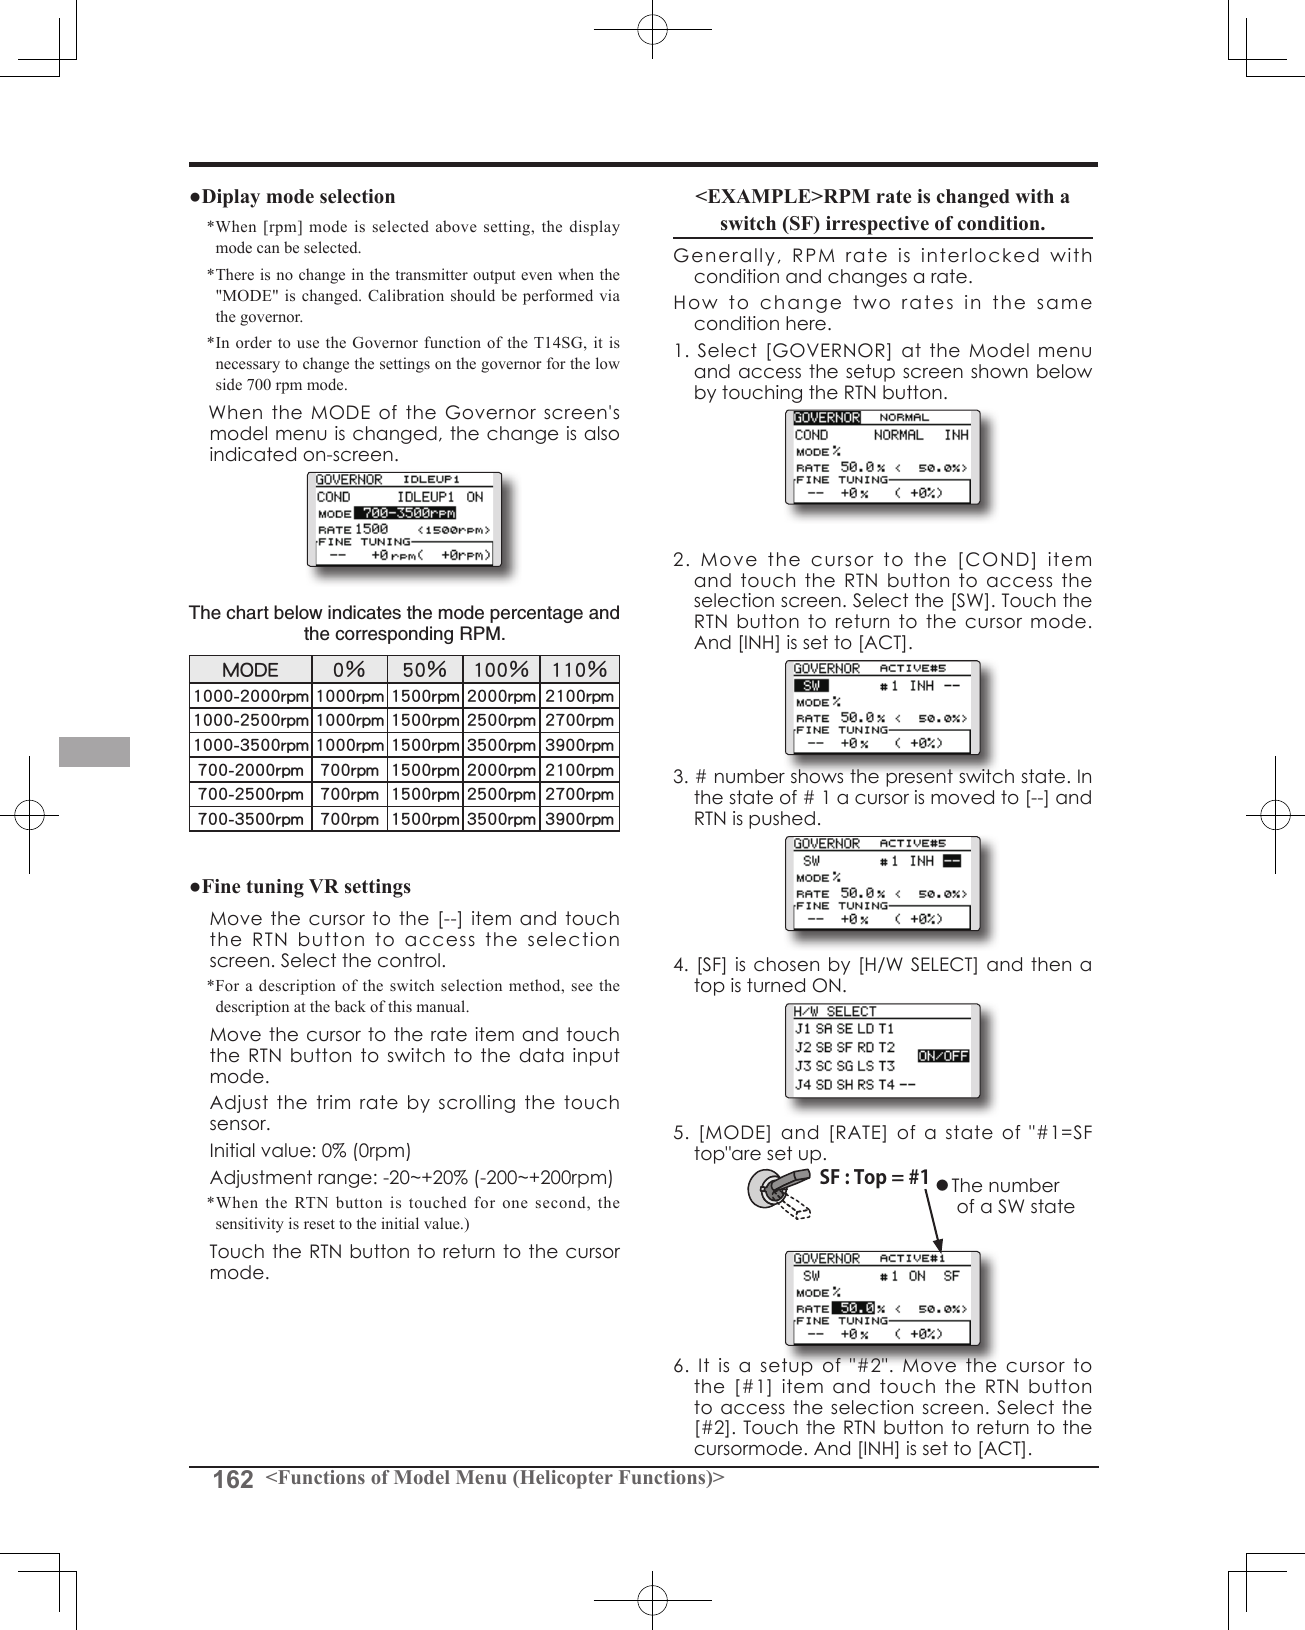 162 &lt;Functions of Model Menu (Helicopter Functions)&gt;●Diplay mode selection*When [rpm]  mode  is  selected  above  setting, the  display mode can be selected.* There is no change in the transmitter output even when the &quot;MODE&quot; is changed. Calibration should be performed via the governor.* In order  to use  the Governor  function of  the T14SG, it is necessary to change the settings on the governor for the low side 700 rpm mode.　WhentheMODEoftheGovernorscreen&apos;smodelmenuischanged,thechangeisalsoindicatedon-screen.The chart below indicates the mode percentage and the corresponding RPM.MODE 0％ 50％ 100％ 110％1000-2000rpm 1000rpm 1500rpm 2000rpm 2100rpm1000-2500rpm 1000rpm 1500rpm 2500rpm 2700rpm1000-3500rpm 1000rpm 1500rpm 3500rpm 3900rpm700-2000rpm 700rpm 1500rpm 2000rpm 2100rpm700-2500rpm 700rpm 1500rpm 2500rpm 2700rpm700-3500rpm 700rpm 1500rpm 3500rpm 3900rpm ●Fine tuning VR settings Movethecursortothe[--]itemandtouchtheRTNbuttontoaccesstheselectionscreen.Selectthecontrol.*For a description of the switch selection method, see the description at the back of this manual. Movethecursortotherateitemand touchtheRTNbuttontoswitchtothedatainputmode. Adjustthetrimratebyscrollingthetouchsensor. Initialvalue:0%(0rpm) Adjustmentrange:-20~+20%(-200~+200rpm)*When  the  RTN  button  is  touched  for  one  second,  the sensitivity is reset to the initial value.) TouchtheRTNbuttontoreturntothecursormode.&lt;EXAMPLE&gt;RPM rate is changed with a switch (SF) irrespective of condition. Generally,RPMrateisinterlockedwithconditionandchangesarate.Howtochangetworatesinthesameconditionhere.1.Select[GOVERNOR]attheModelmenuandaccessthesetupscreenshownbelowbytouchingtheRTNbutton.2.Movethecursortothe[COND]itemandtouchtheRTNbuttontoaccesstheselectionscreen.Selectthe[SW].TouchtheRTNbuttontoreturntothecursormode.And[INH]issetto[ACT].3.#numbershowsthepresentswitchstate.Inthestateof#1acursorismovedto[--]andRTNispushed.4.[SF]ischosenby[H/WSELECT]andthenatopisturnedON.5.[MODE]and[RATE]ofastateof&quot;#1=SFtop&quot;aresetup.6.Itisasetupof&quot;#2&quot;.Movethecursortothe[#1]itemandtouchtheRTNbuttontoaccesstheselectionscreen.Selectthe[#2].TouchtheRTNbuttontoreturntothecursormode.And[INH]issetto[ACT].SF : Top = #1 ●ThenumberofaSWstate